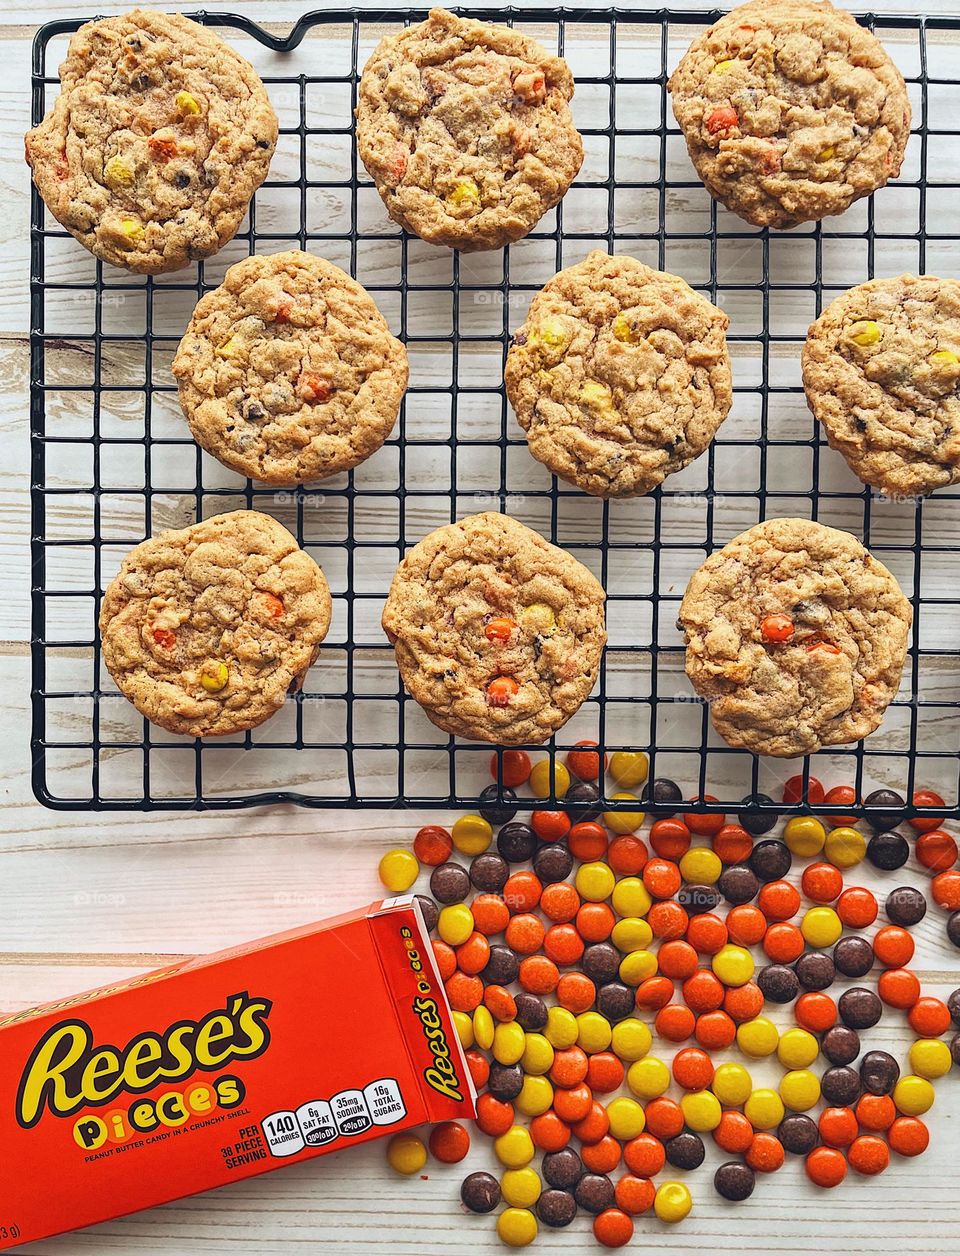 Reese’s Pieces Chocolate Chip cookies on a cooking rack, circle shaped cookies, baking circles at home, geometric shapes in everyday life, patterns of circles, circle shaped candy and cookies, delicious desserts in circular shapes